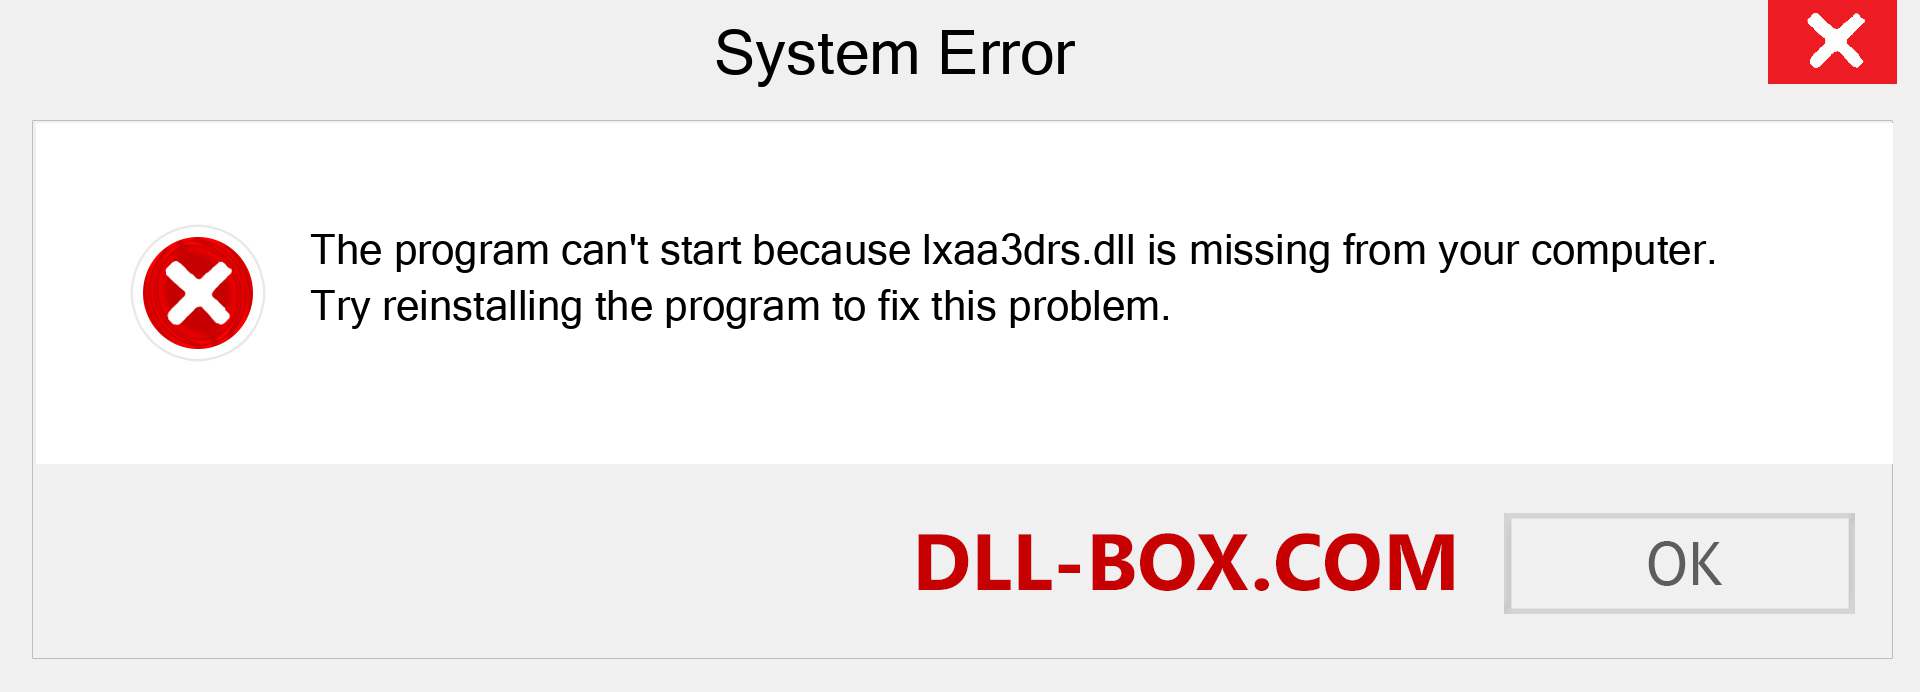  lxaa3drs.dll file is missing?. Download for Windows 7, 8, 10 - Fix  lxaa3drs dll Missing Error on Windows, photos, images